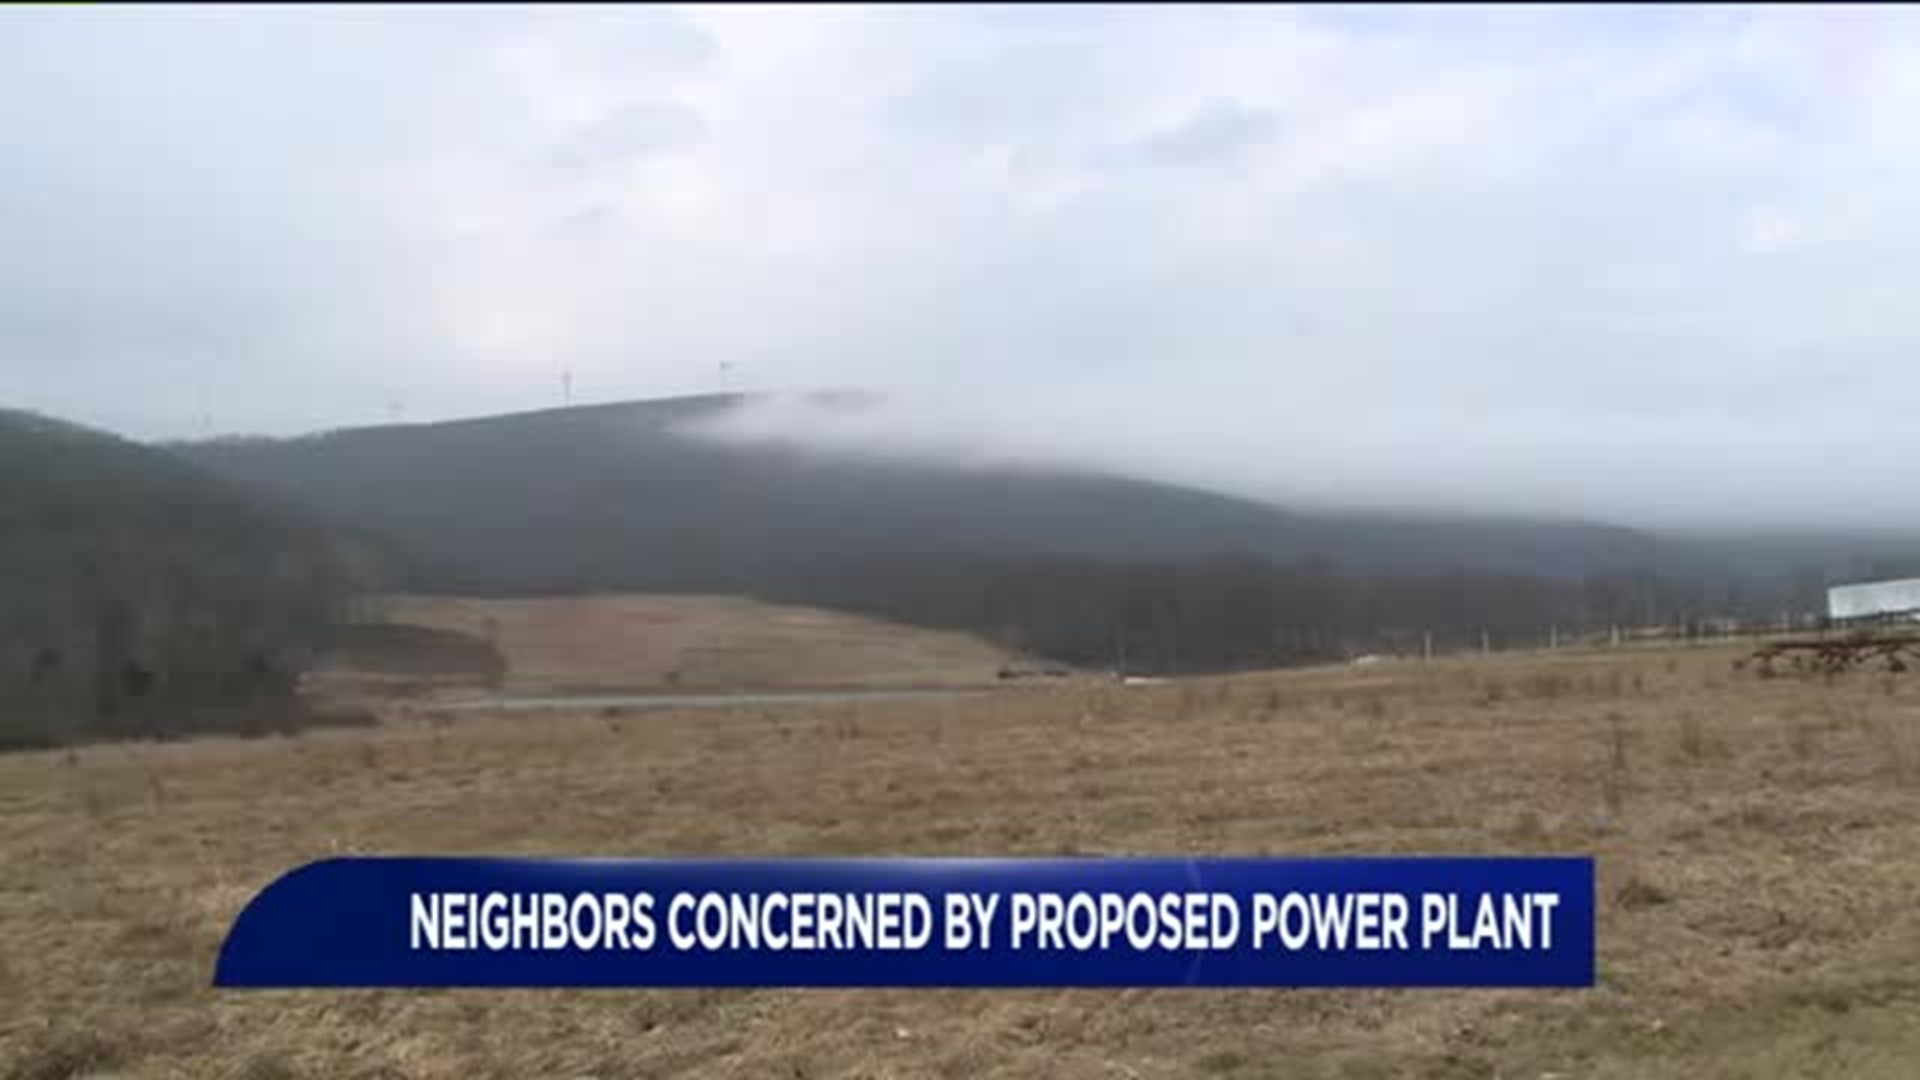 Waymart Neighbors Voice Concerns over Proposed Power Plant